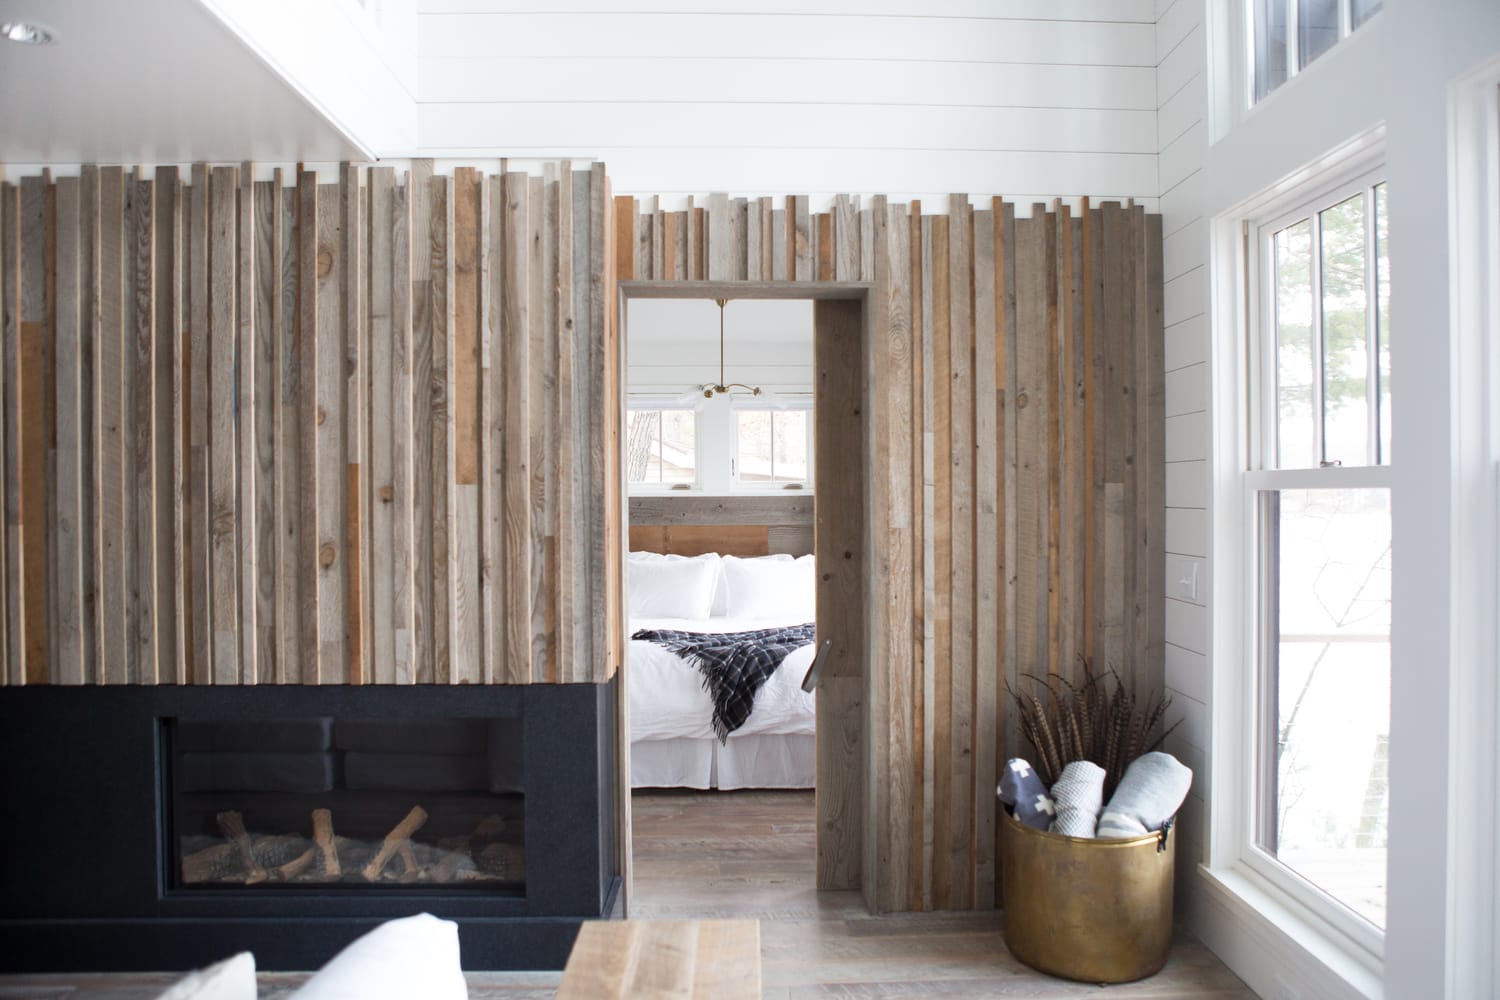 Reclaimed wood paneling wall